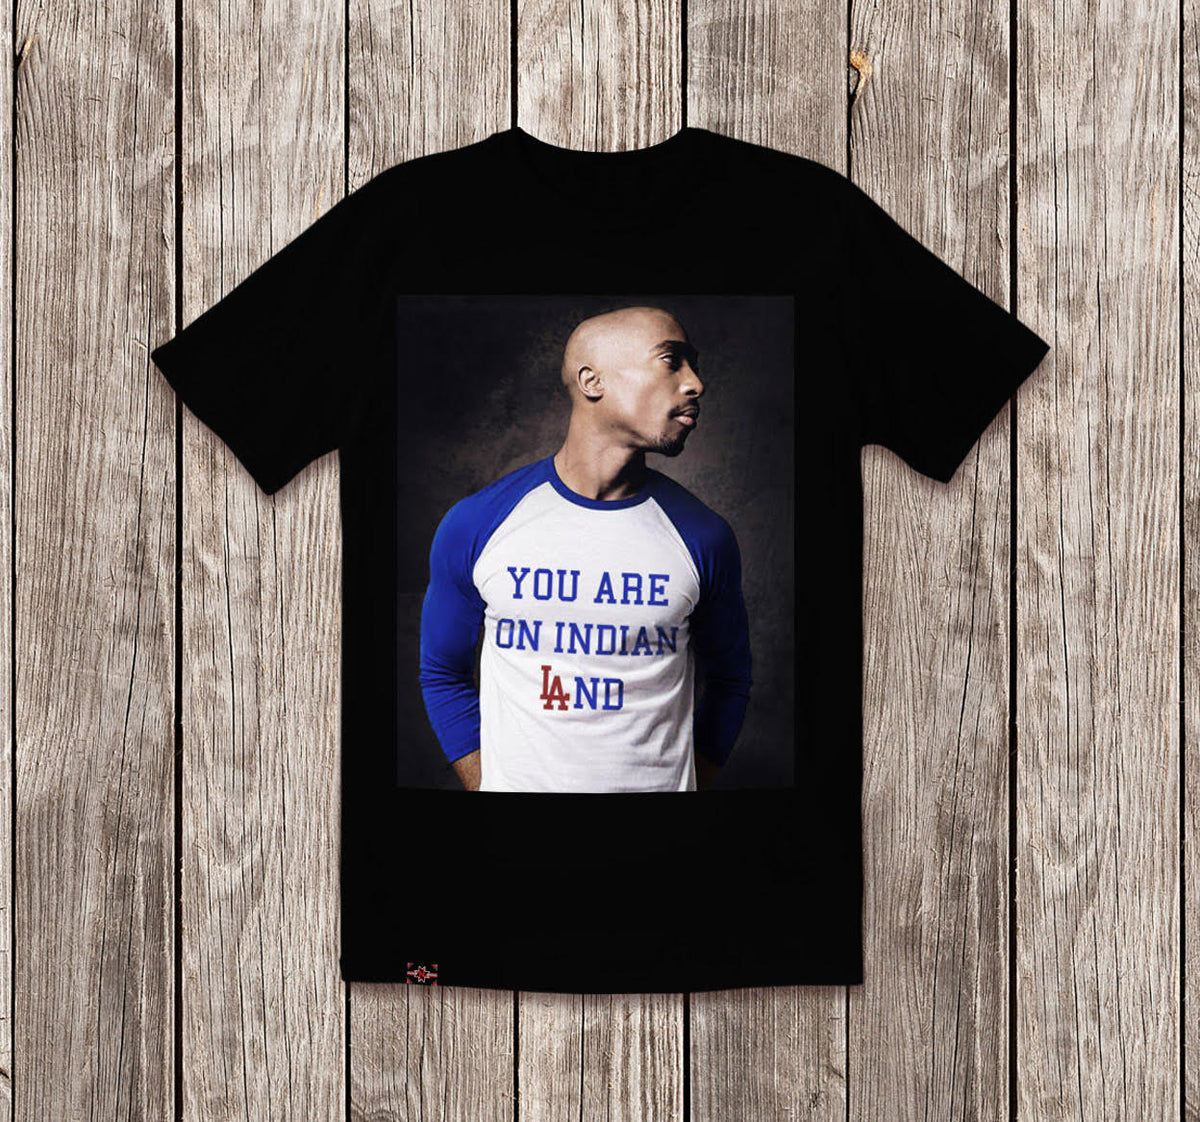 Buy Rolling Stone Magazine Tupac Cover T-Shirt - Rolling Stone Shop